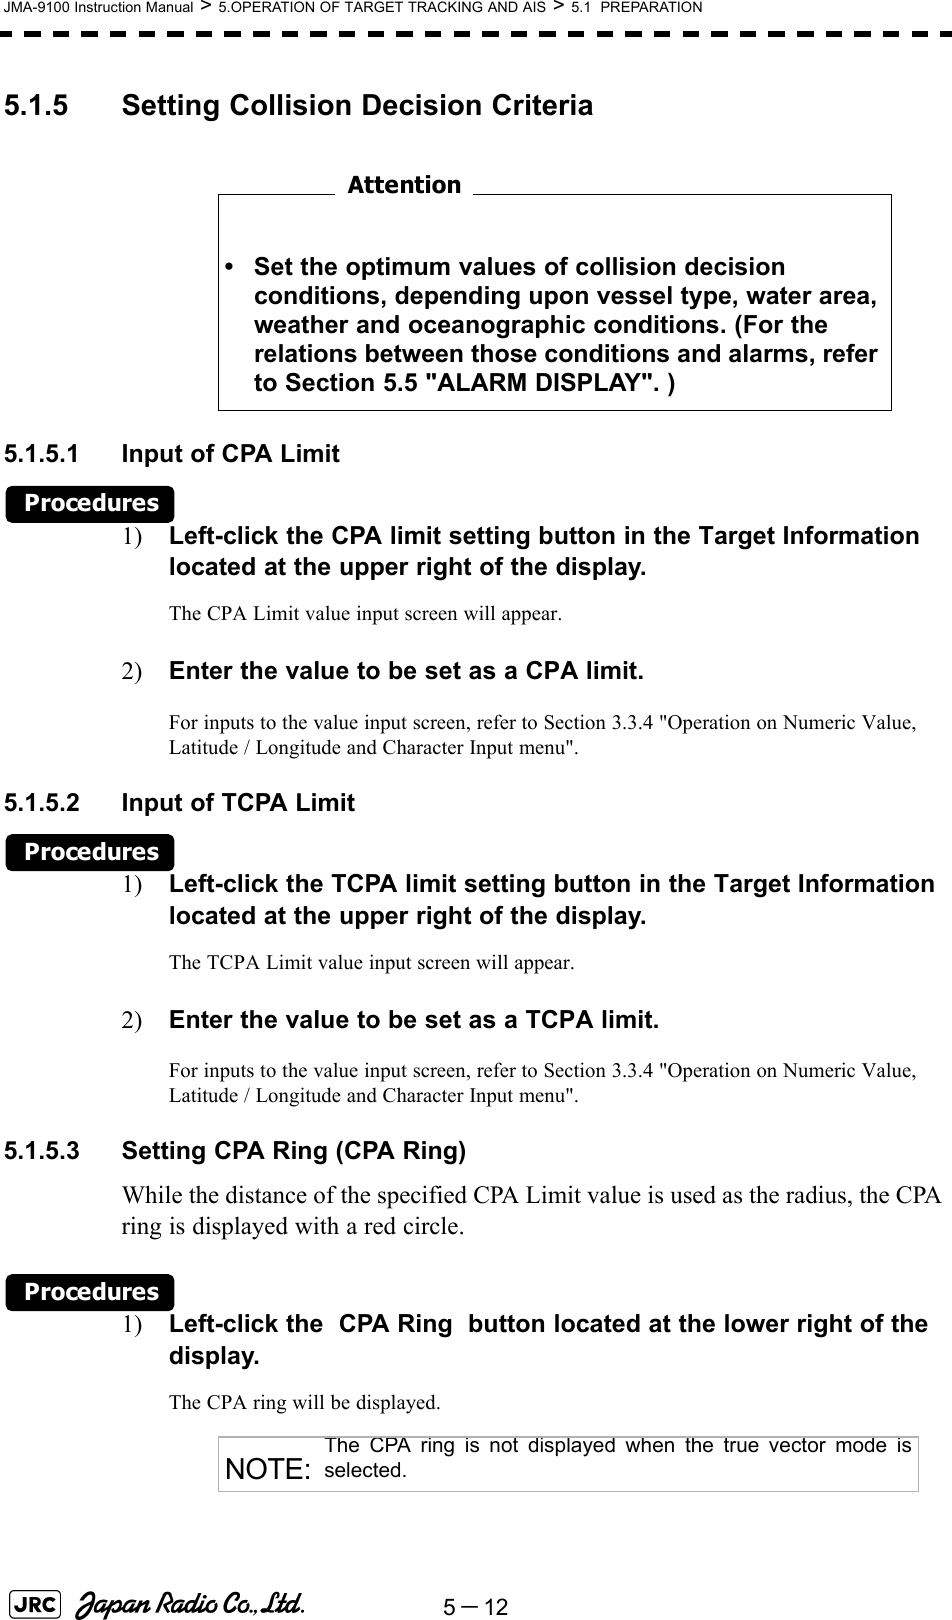 5－12JMA-9100 Instruction Manual &gt; 5.OPERATION OF TARGET TRACKING AND AIS &gt; 5.1  PREPARATION5.1.5 Setting Collision Decision Criteria　　　　　　　　5.1.5.1 Input of CPA LimitProcedures1) Left-click the CPA limit setting button in the Target Information located at the upper right of the display.The CPA Limit value input screen will appear.2) Enter the value to be set as a CPA limit.For inputs to the value input screen, refer to Section 3.3.4 &quot;Operation on Numeric Value, Latitude / Longitude and Character Input menu&quot;.5.1.5.2 Input of TCPA LimitProcedures1) Left-click the TCPA limit setting button in the Target Information located at the upper right of the display.The TCPA Limit value input screen will appear.2) Enter the value to be set as a TCPA limit.For inputs to the value input screen, refer to Section 3.3.4 &quot;Operation on Numeric Value, Latitude / Longitude and Character Input menu&quot;.5.1.5.3 Setting CPA Ring (CPA Ring)While the distance of the specified CPA Limit value is used as the radius, the CPA ring is displayed with a red circle.Procedures1) Left-click the  CPA Ring  button located at the lower right of the display.The CPA ring will be displayed. • Set the optimum values of collision decision conditions, depending upon vessel type, water area, weather and oceanographic conditions. (For the relations between those conditions and alarms, refer to Section 5.5 &quot;ALARM DISPLAY&quot;. )NOTE:The CPA ring is not displayed when the true vector mode isselected.Attention